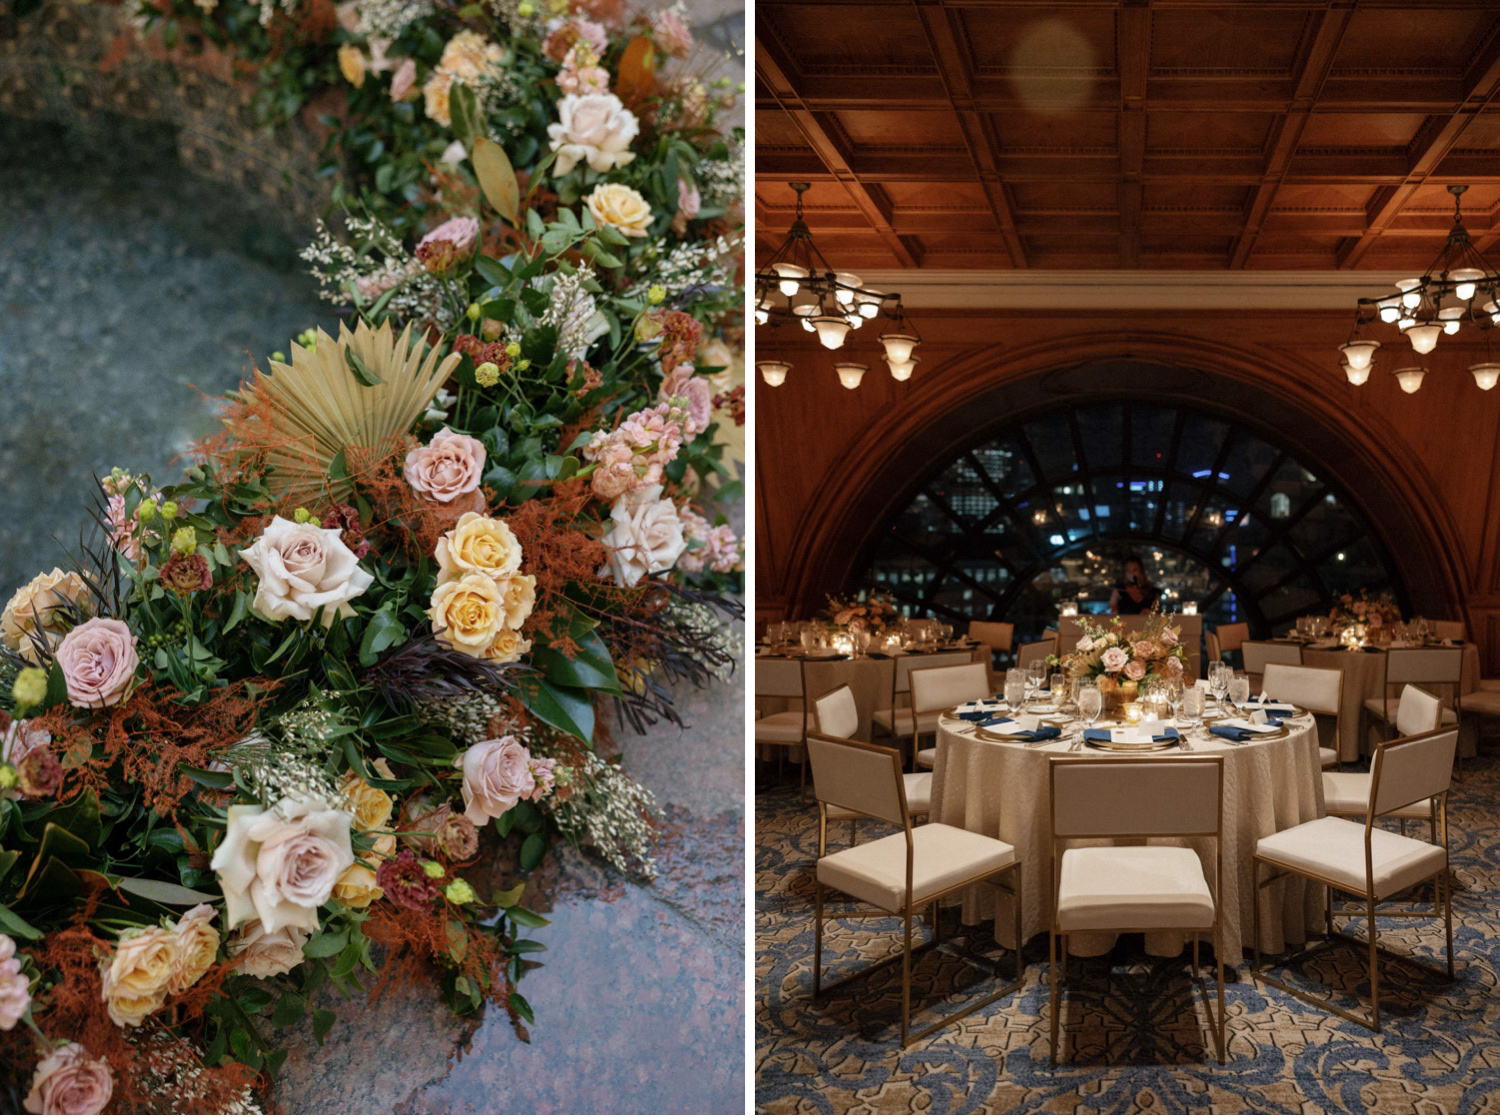 The top wedding venues in Dallas featuring beautiful locations like The Dallas Arboretum and The Adolphus Hotel.